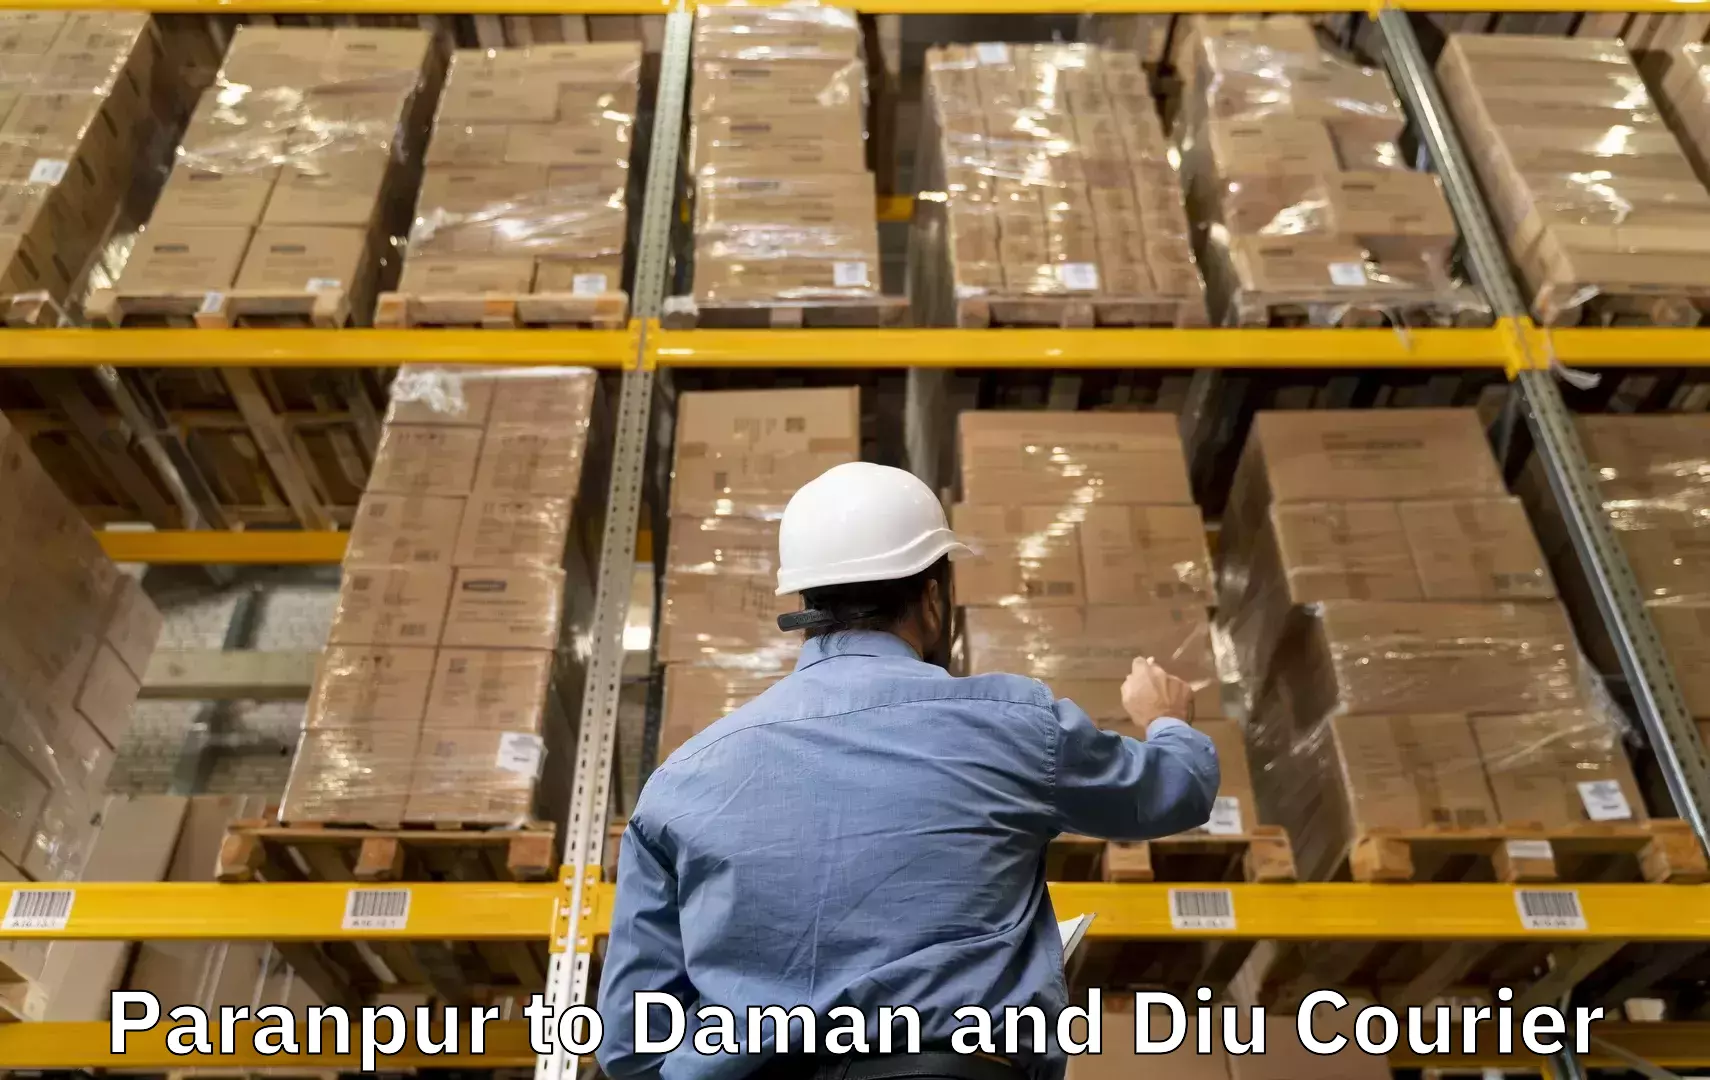 Baggage shipping advice in Paranpur to Daman and Diu